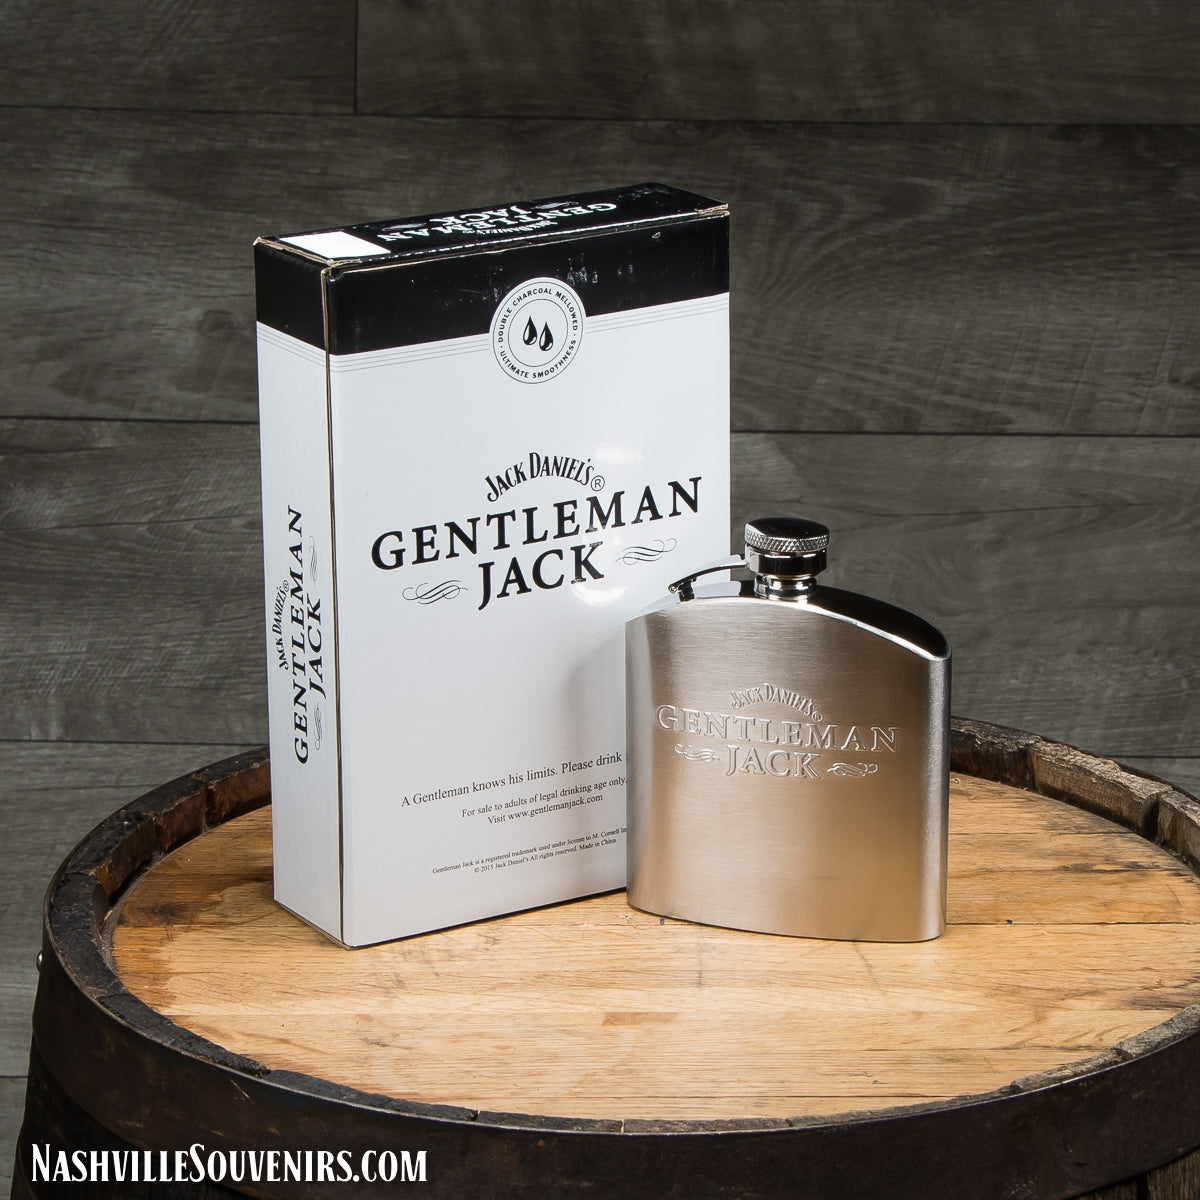 Officially licensed Jack Daniels Gentleman Jack Stainless Flask. FREE SHIPPING on all US orders over $75!